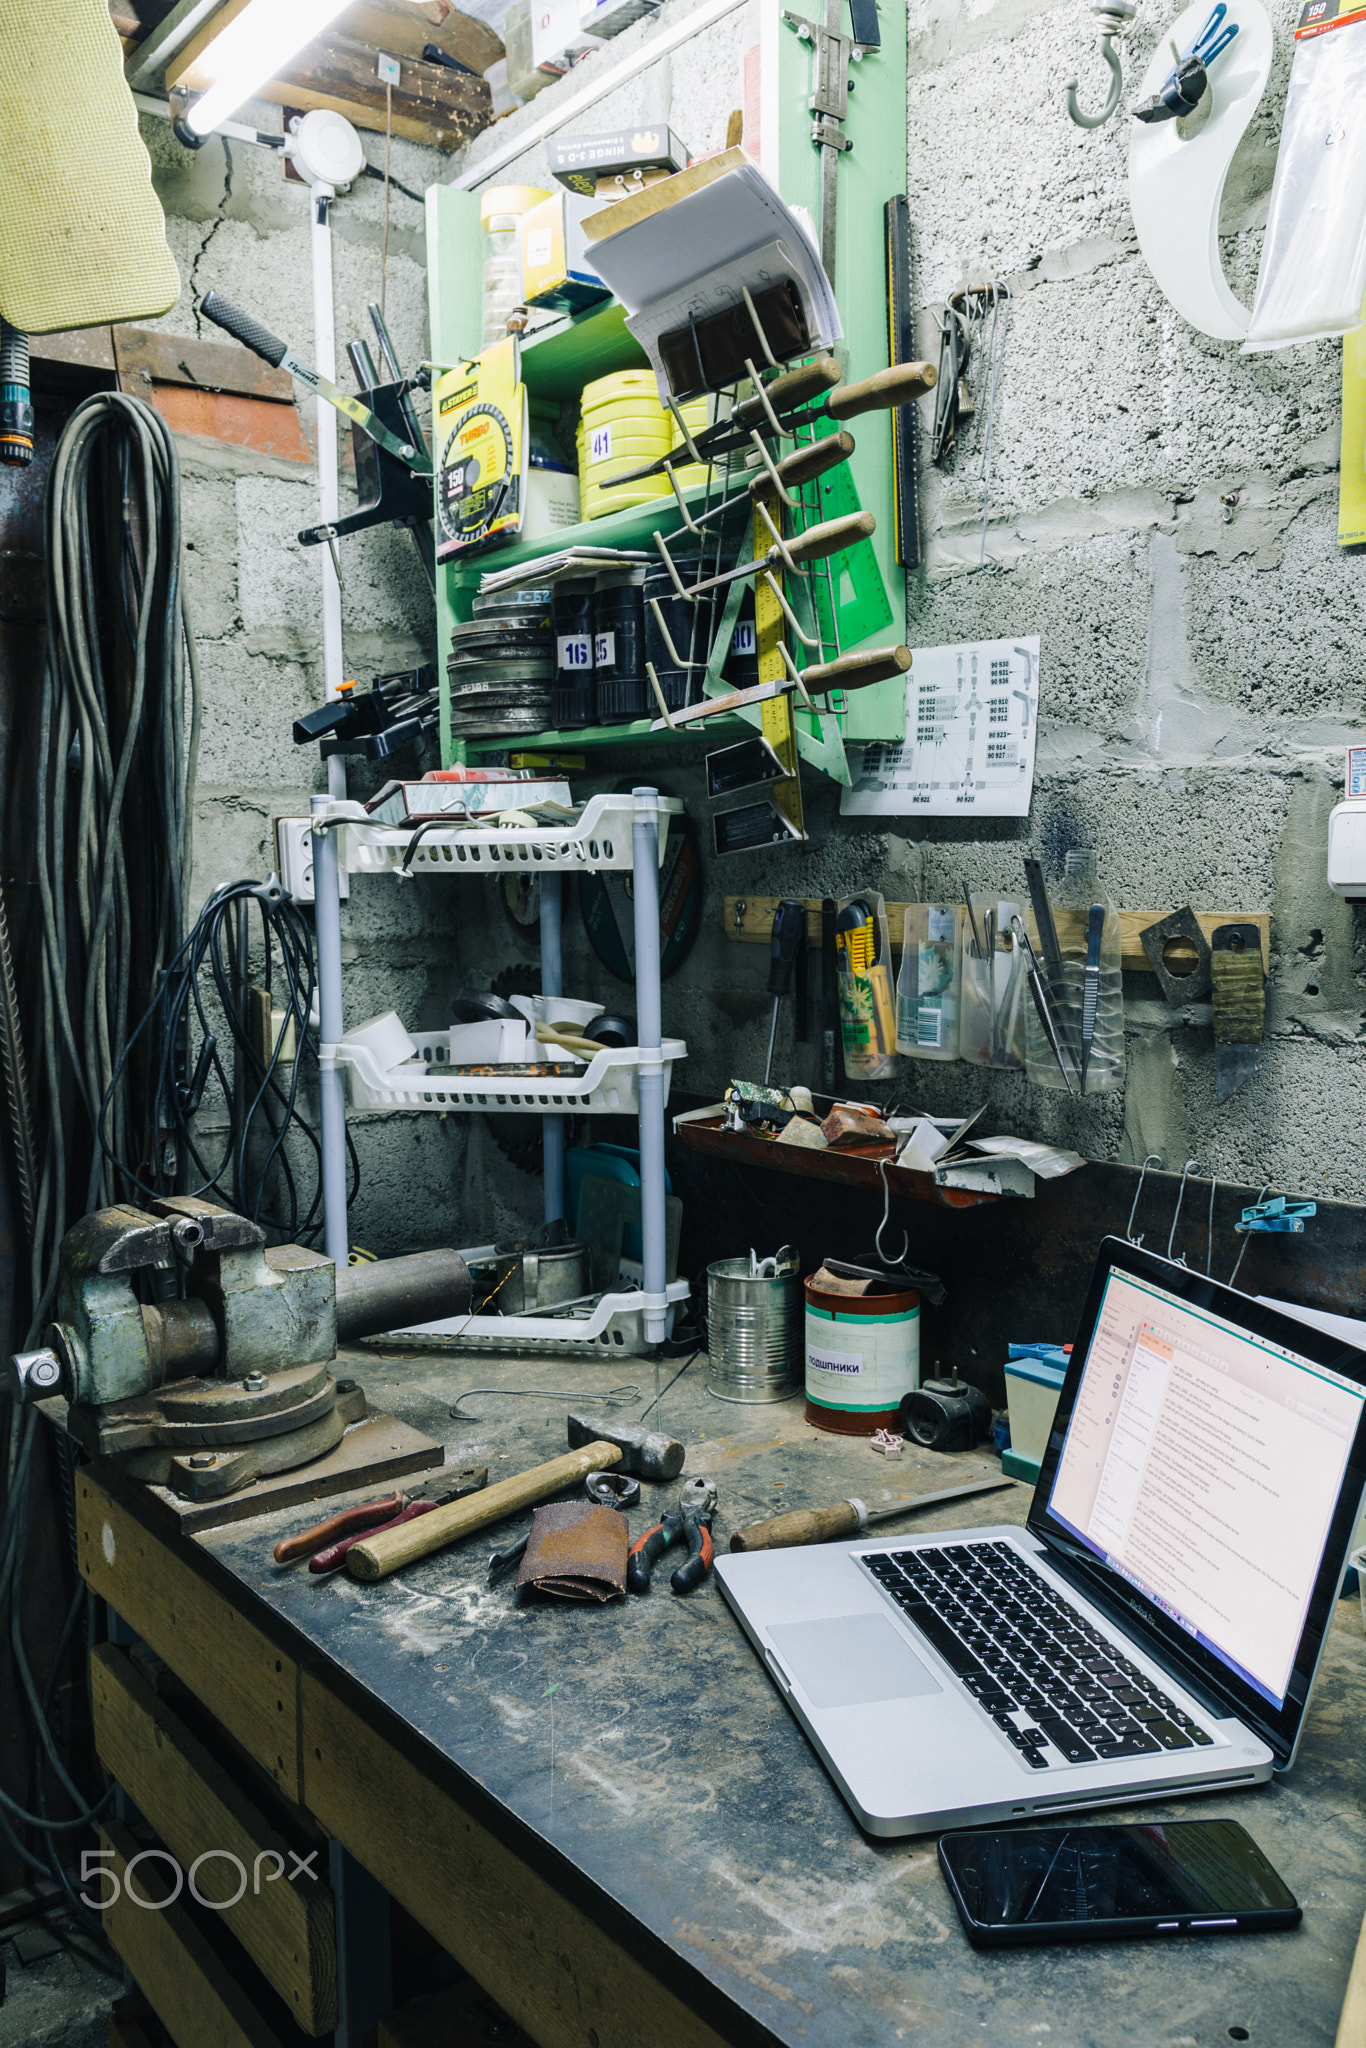 View of old tools,laptop and phone on table